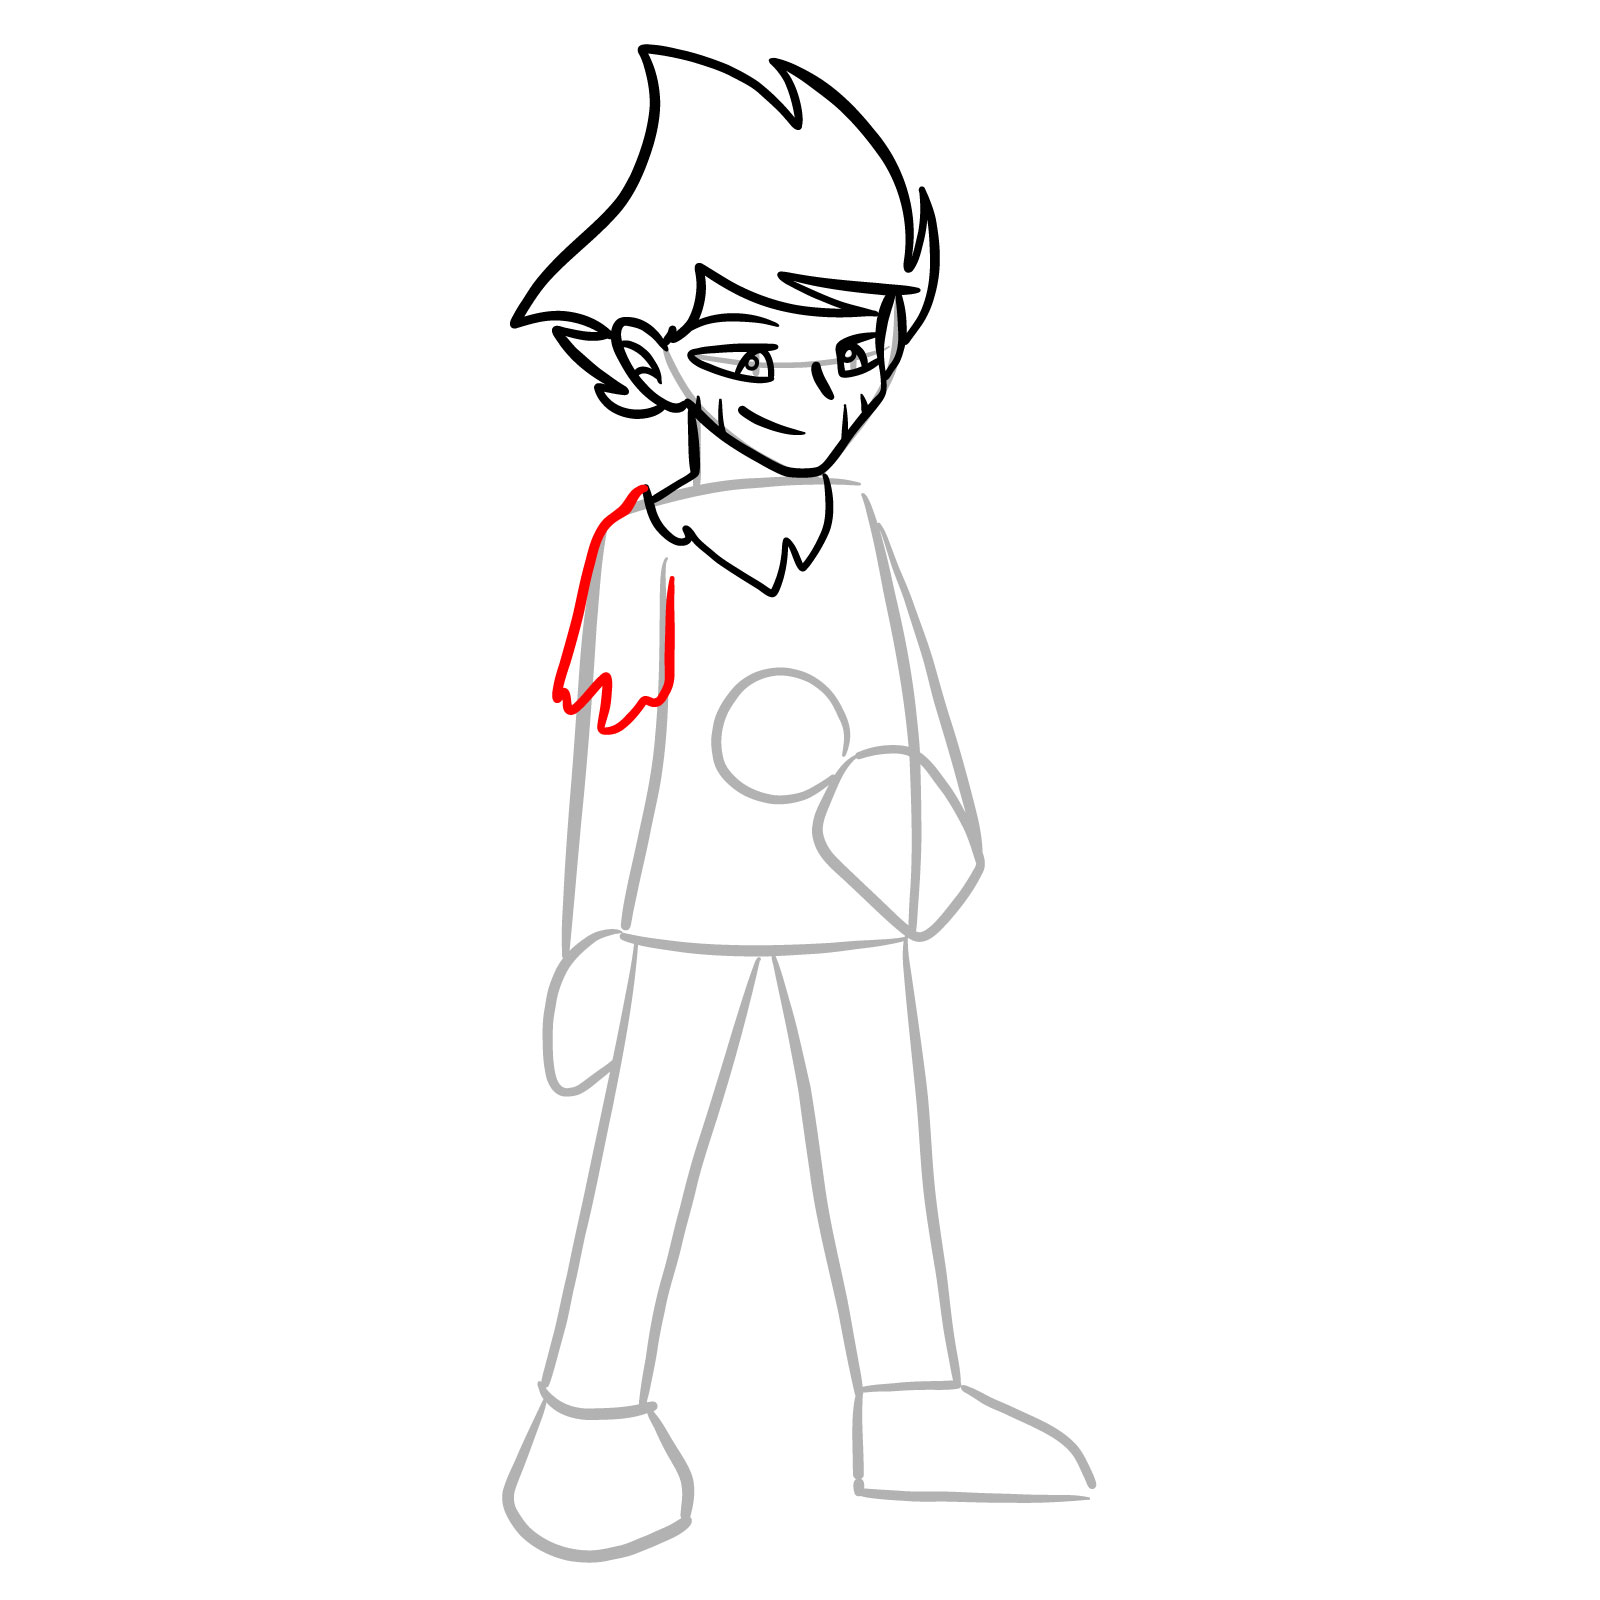 How to draw Bosip from FNF - step 13